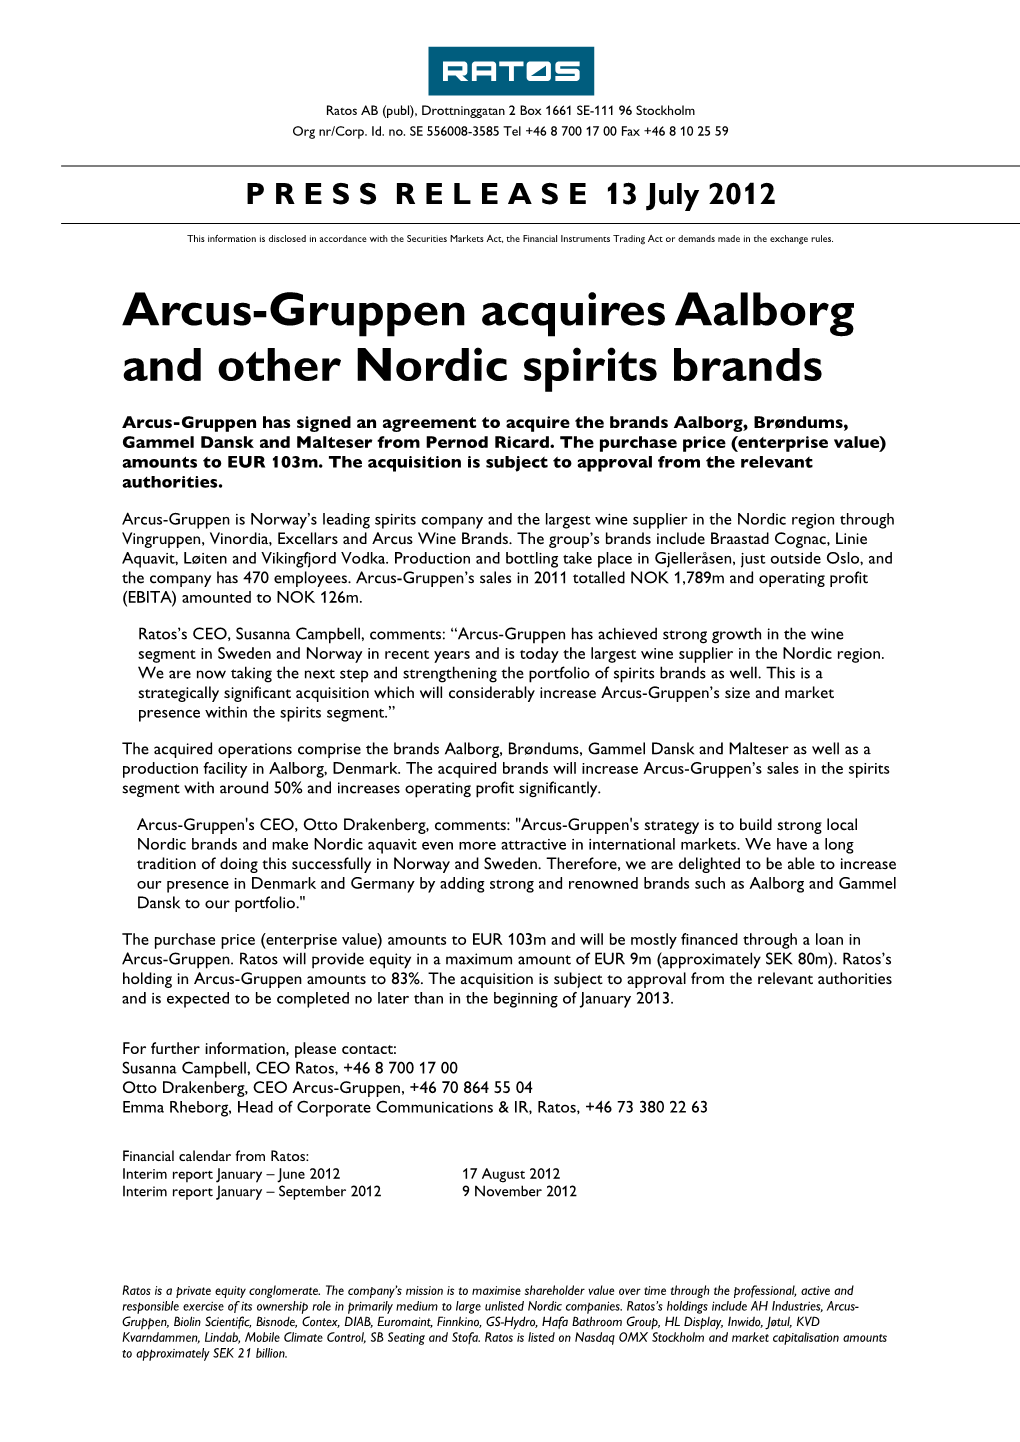 Arcus-Gruppen Acquires Aalborg and Other Nordic Spirits Brands